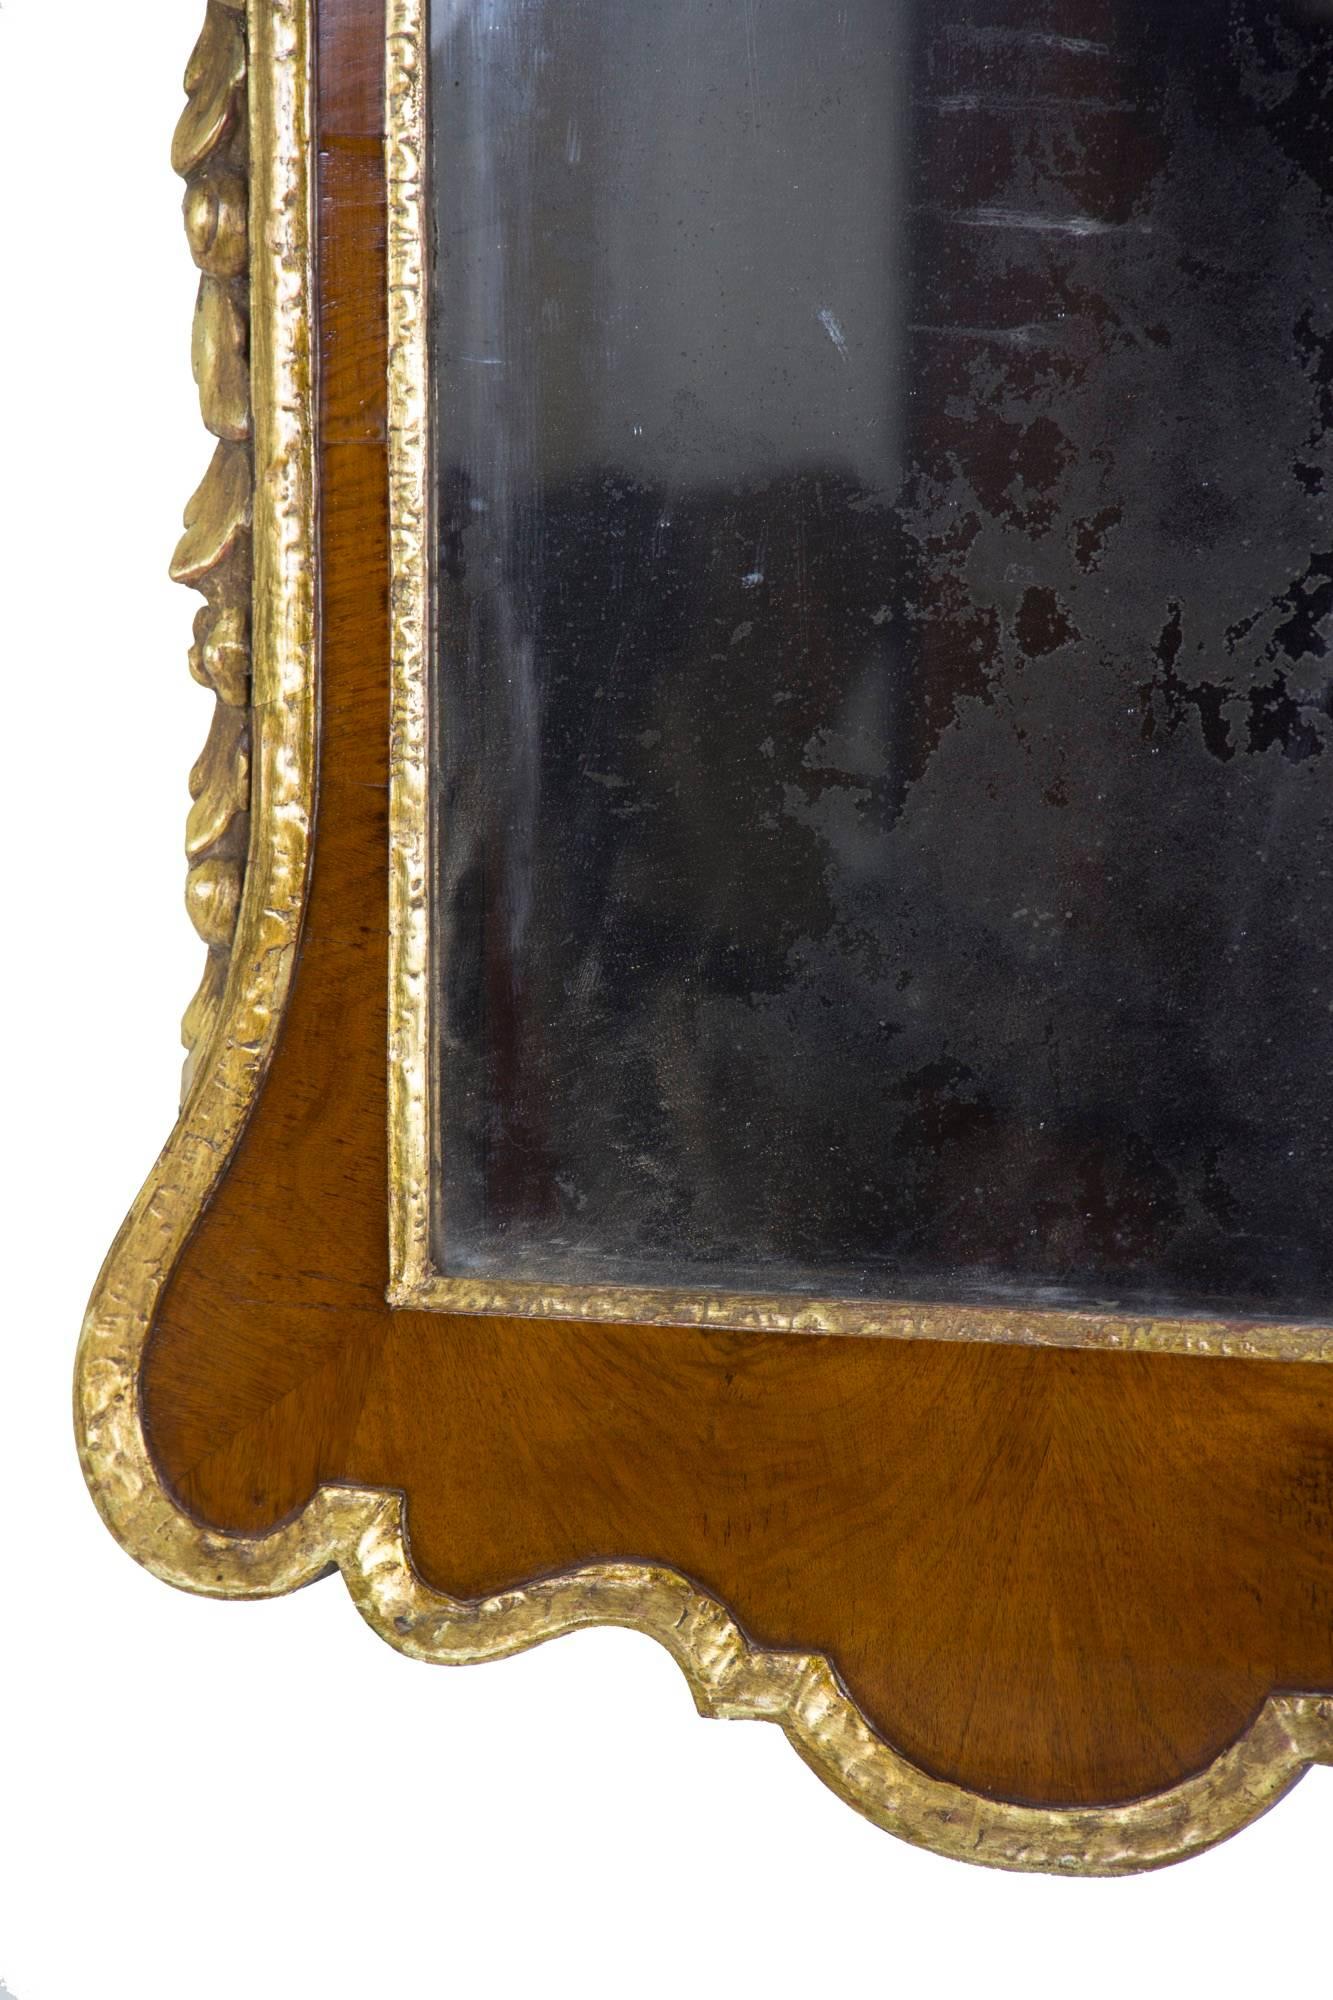 This is a good-sized top of the line Chippendale mirror with a substantial and beautifully carved Prince of Wales feathers finial which, although pursued by some, is not as commonly found as the eagle. It has a good sized scroll pediment with